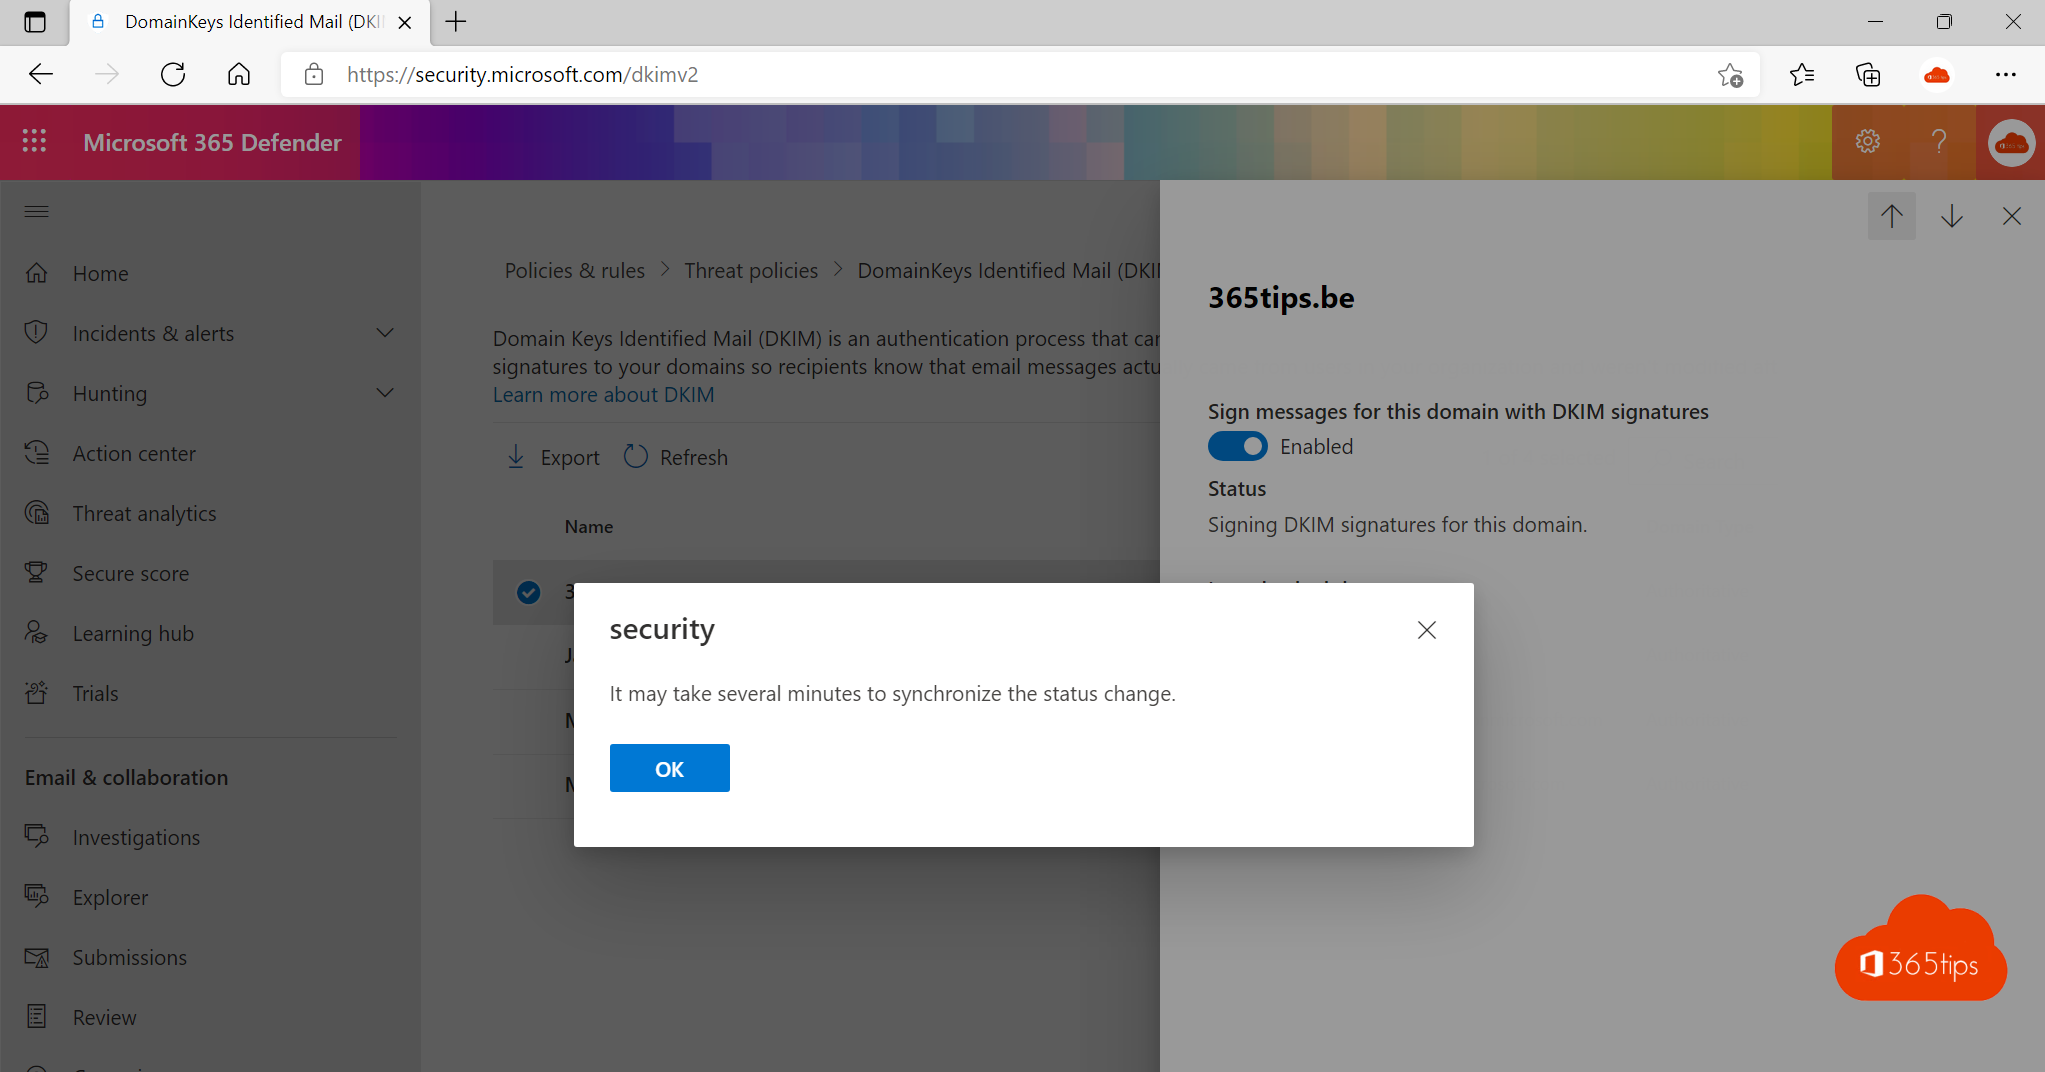 Here's how to activate DKIM in Microsoft 365 and improve your email security